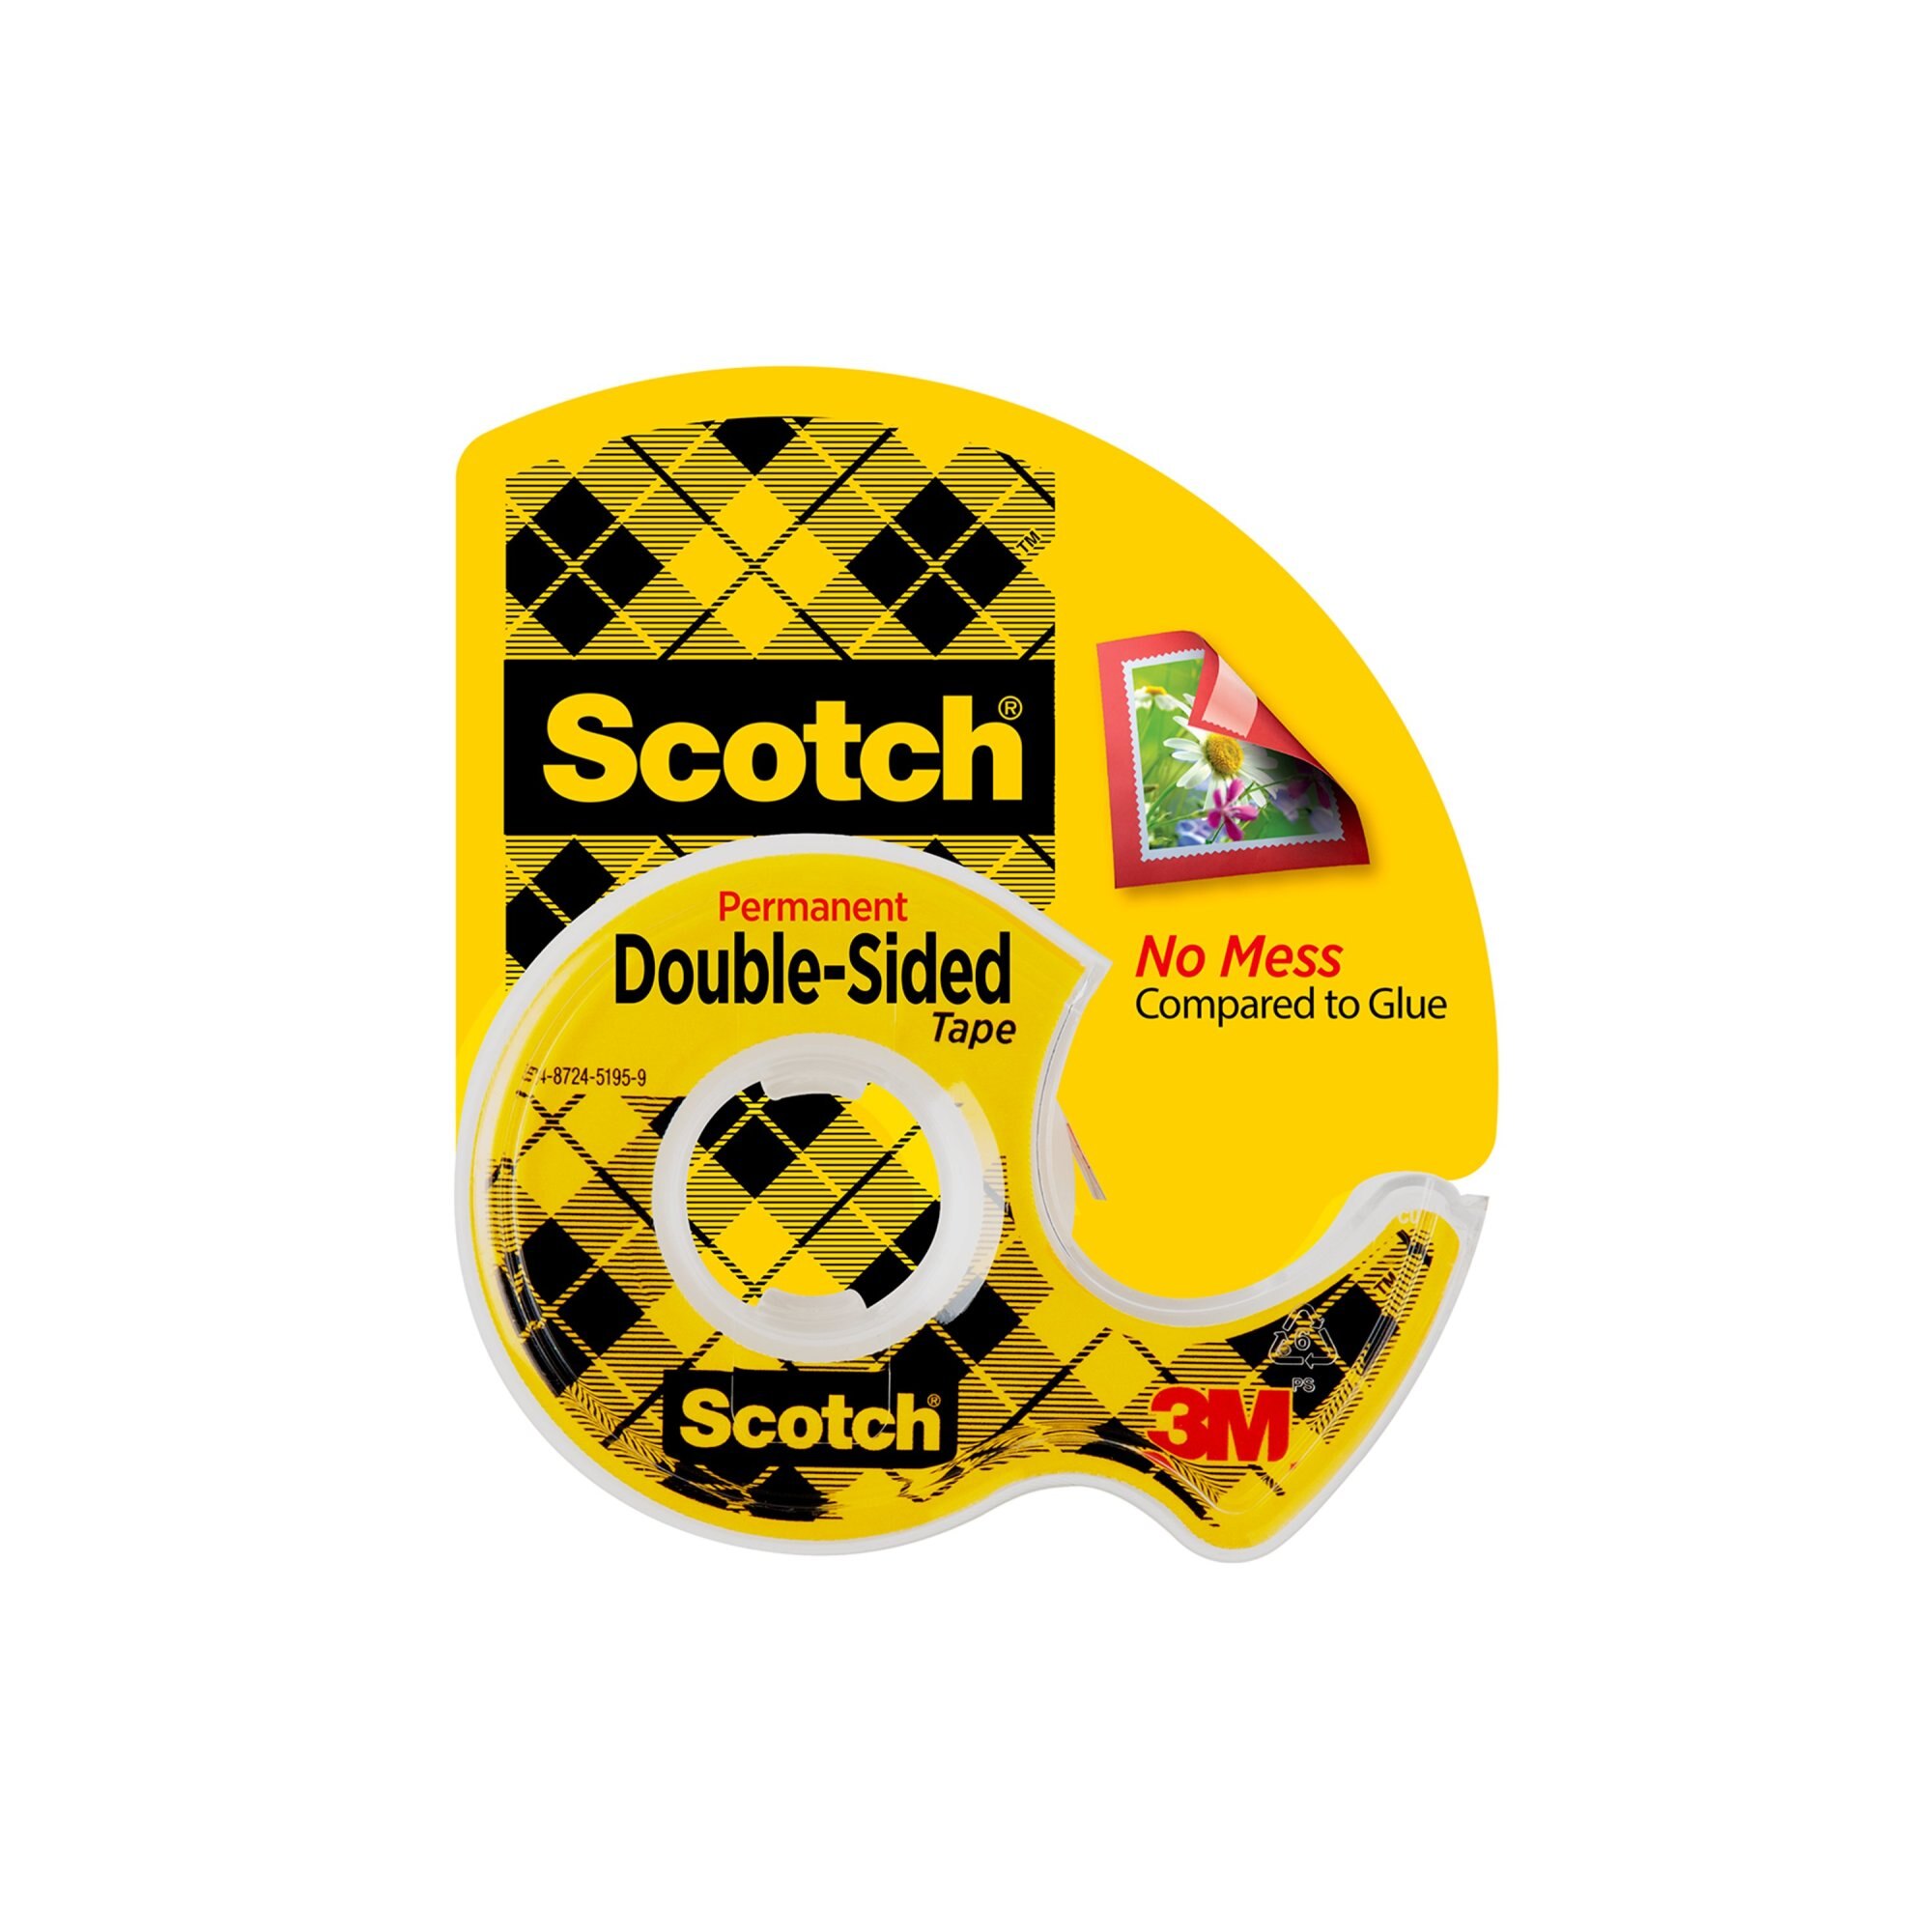 Scotch Removable Double Sided Tape, 3/4 in. x 200 in.